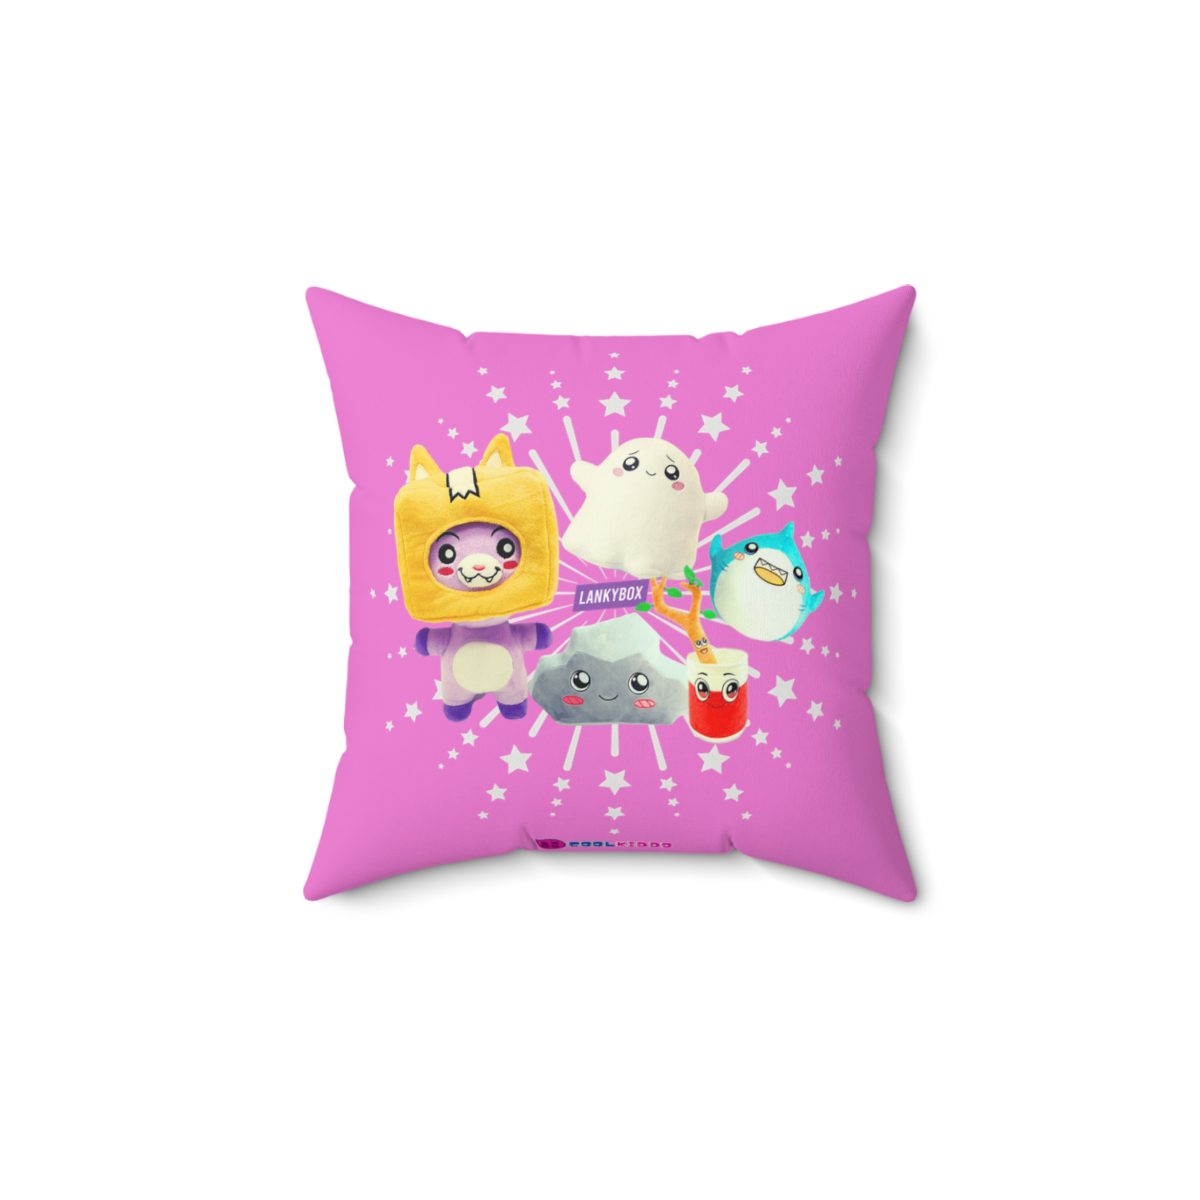 Lankybox Cute Characters Pink Cushion: Double-Sided Print Cool Kiddo 16